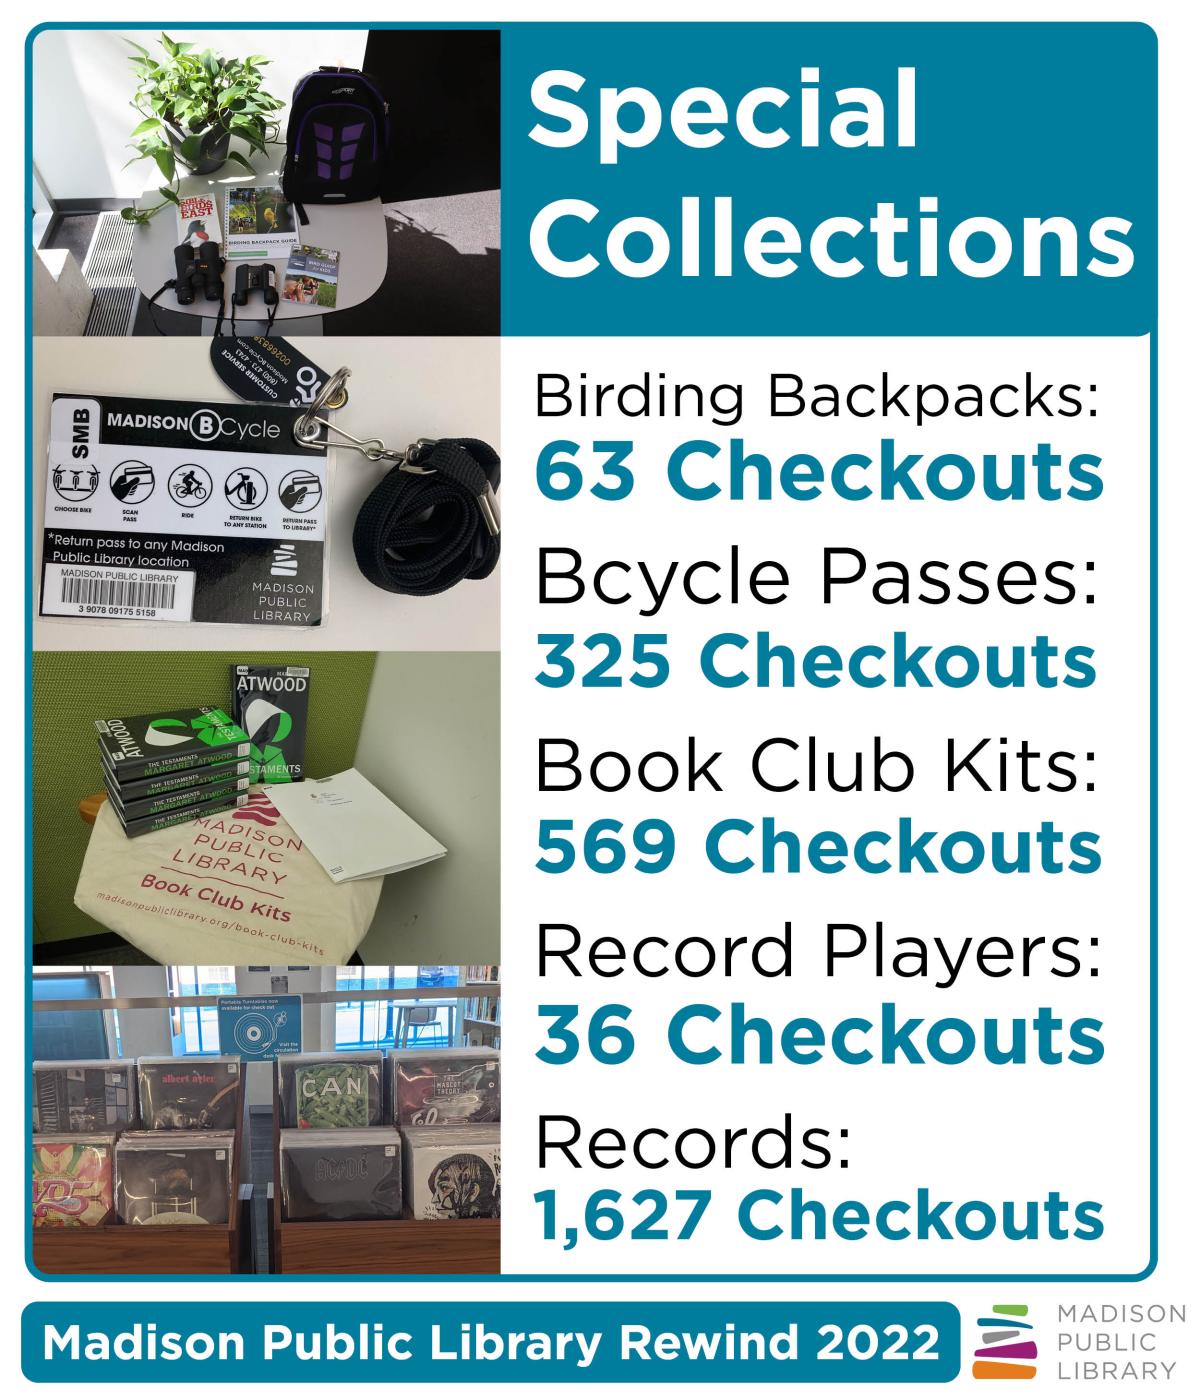 Special collections checkouts in 2022 at Madison Public Library